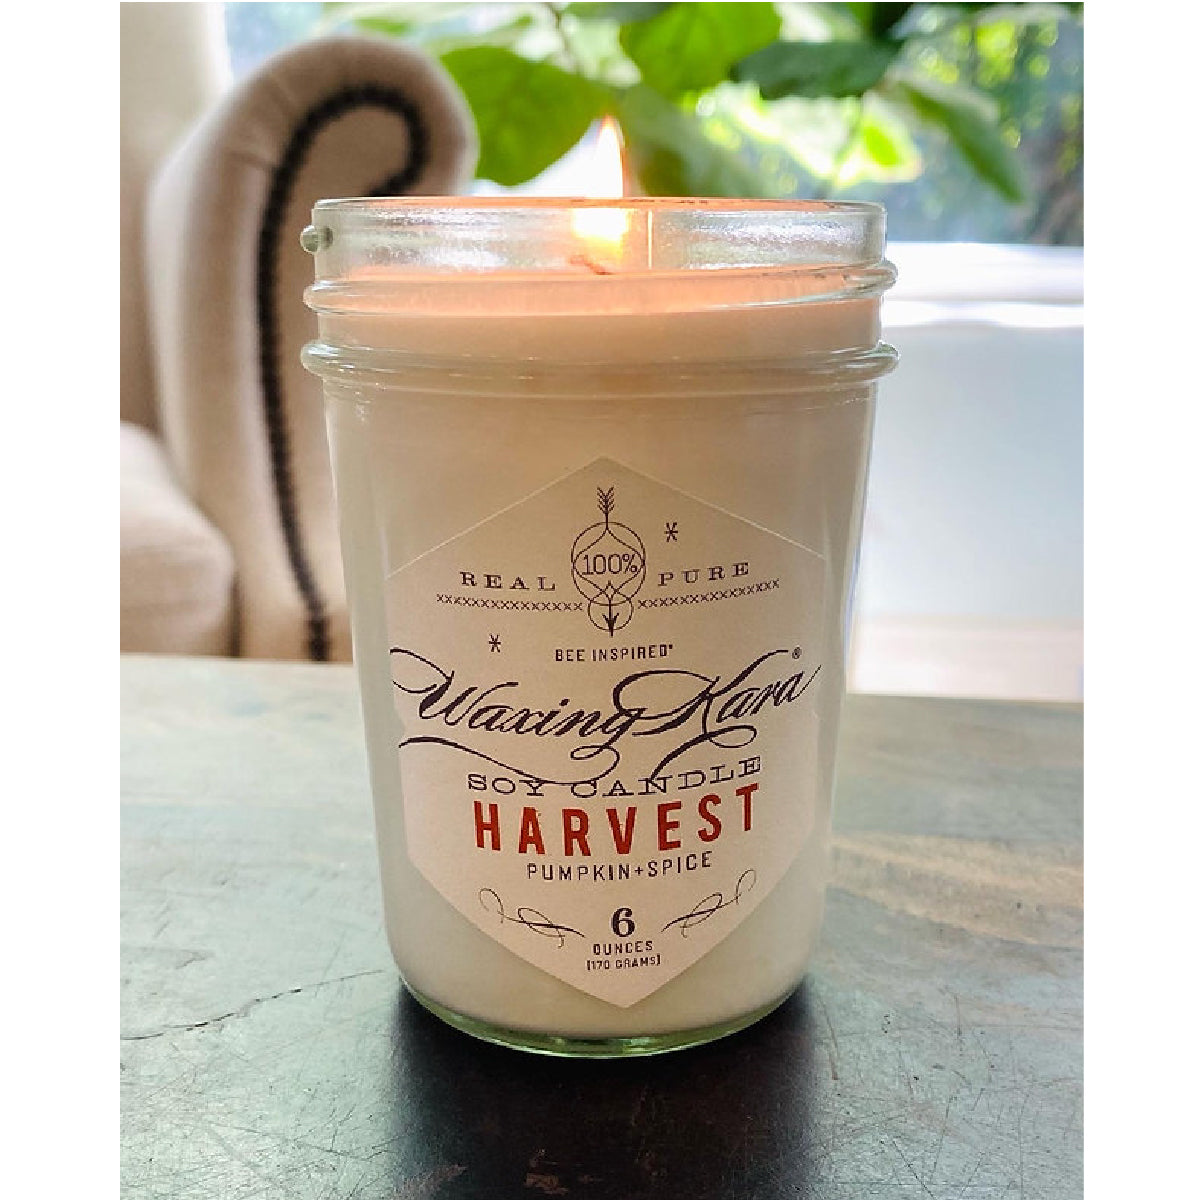 Harvest Candle